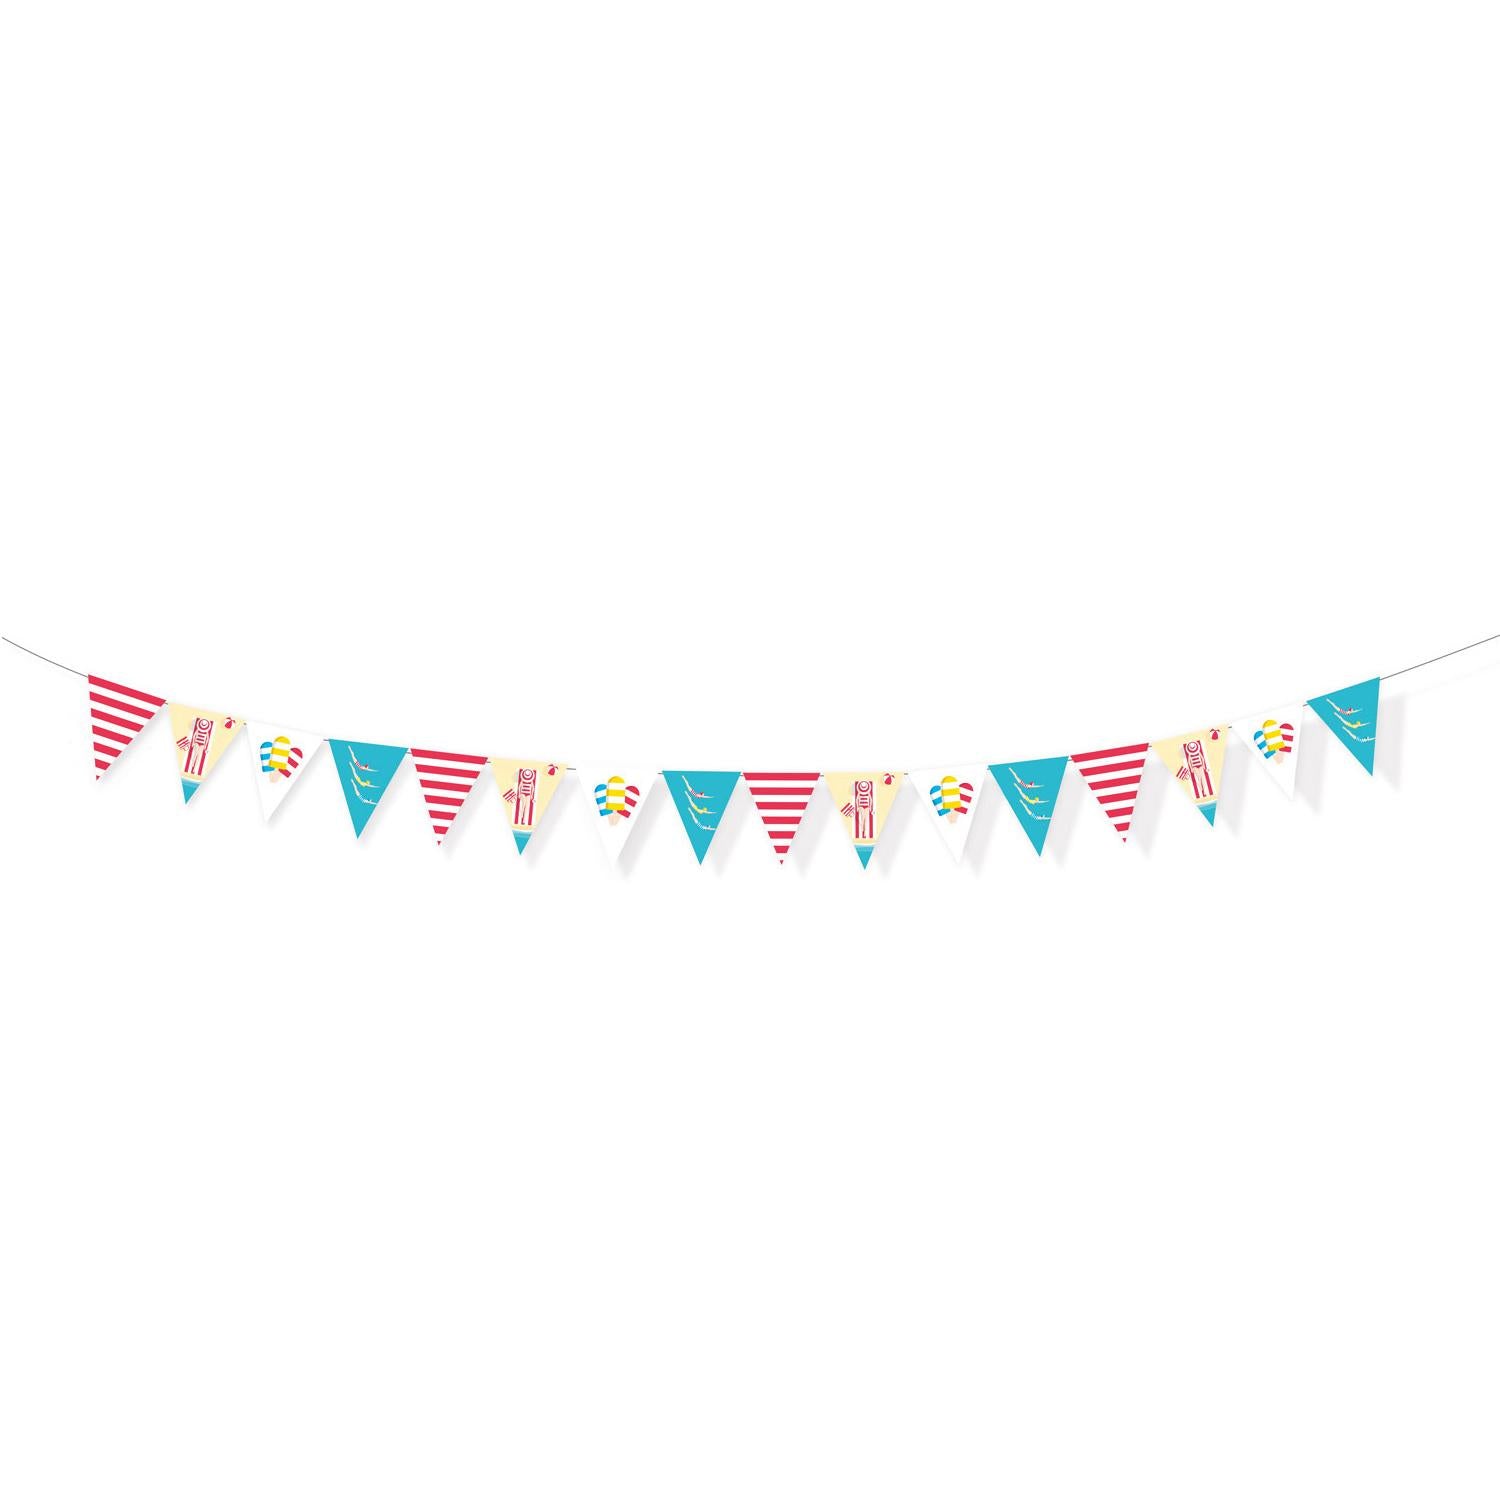 Summer Stories Pennant Banner 4m Decorations - Party Centre